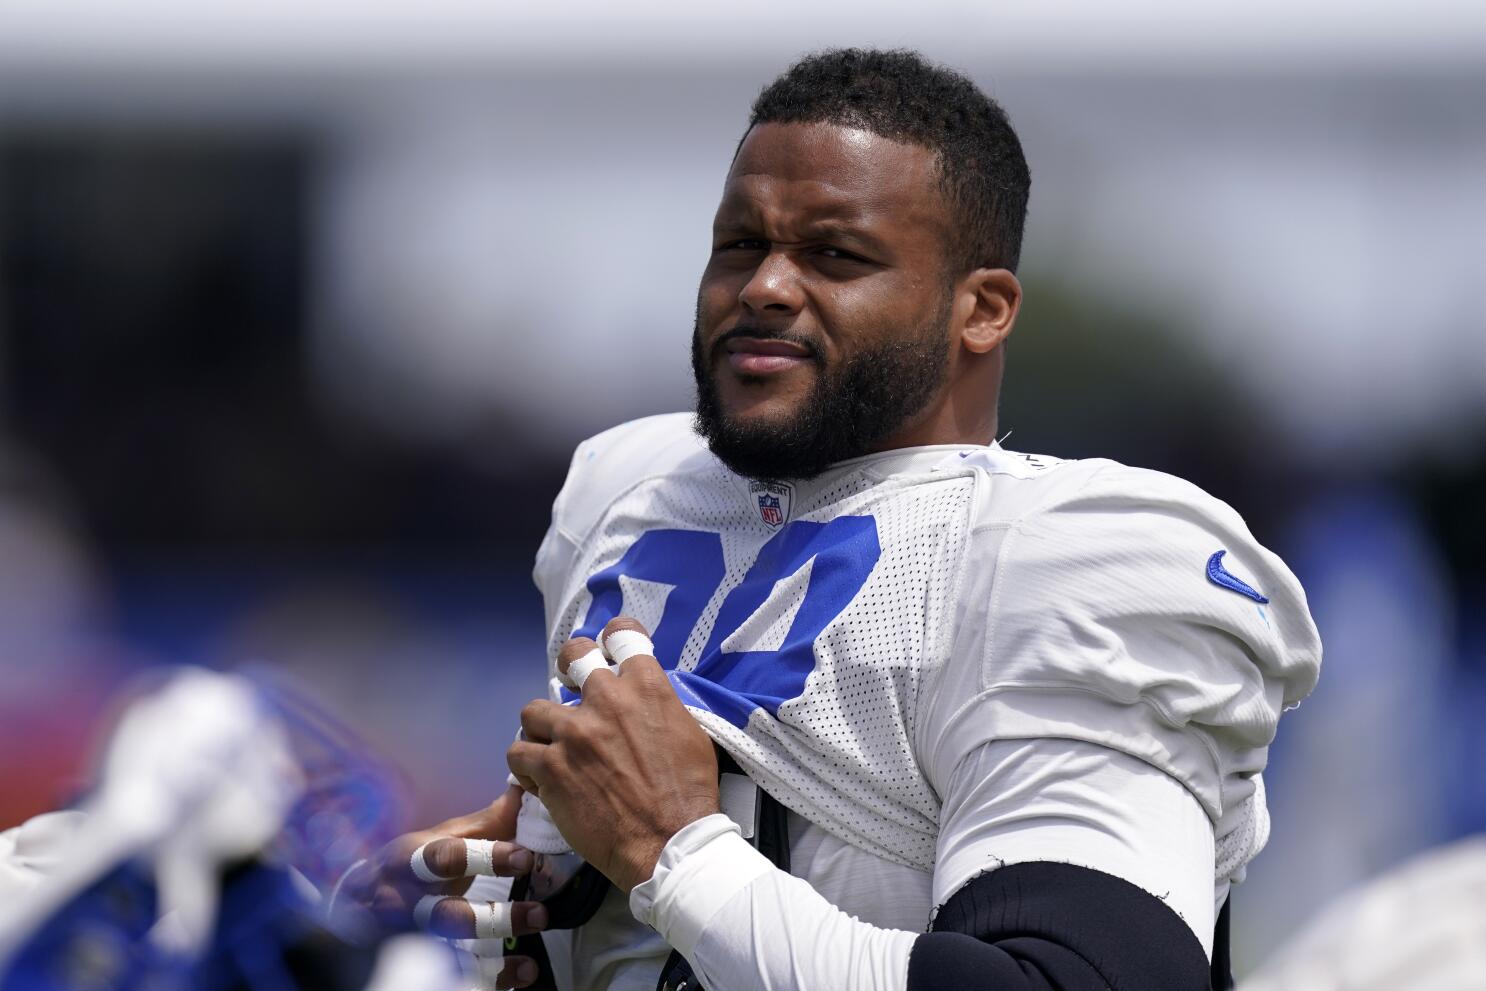 NFL Rumors on X: #Rams Aaron Donald had a jersey swap with The